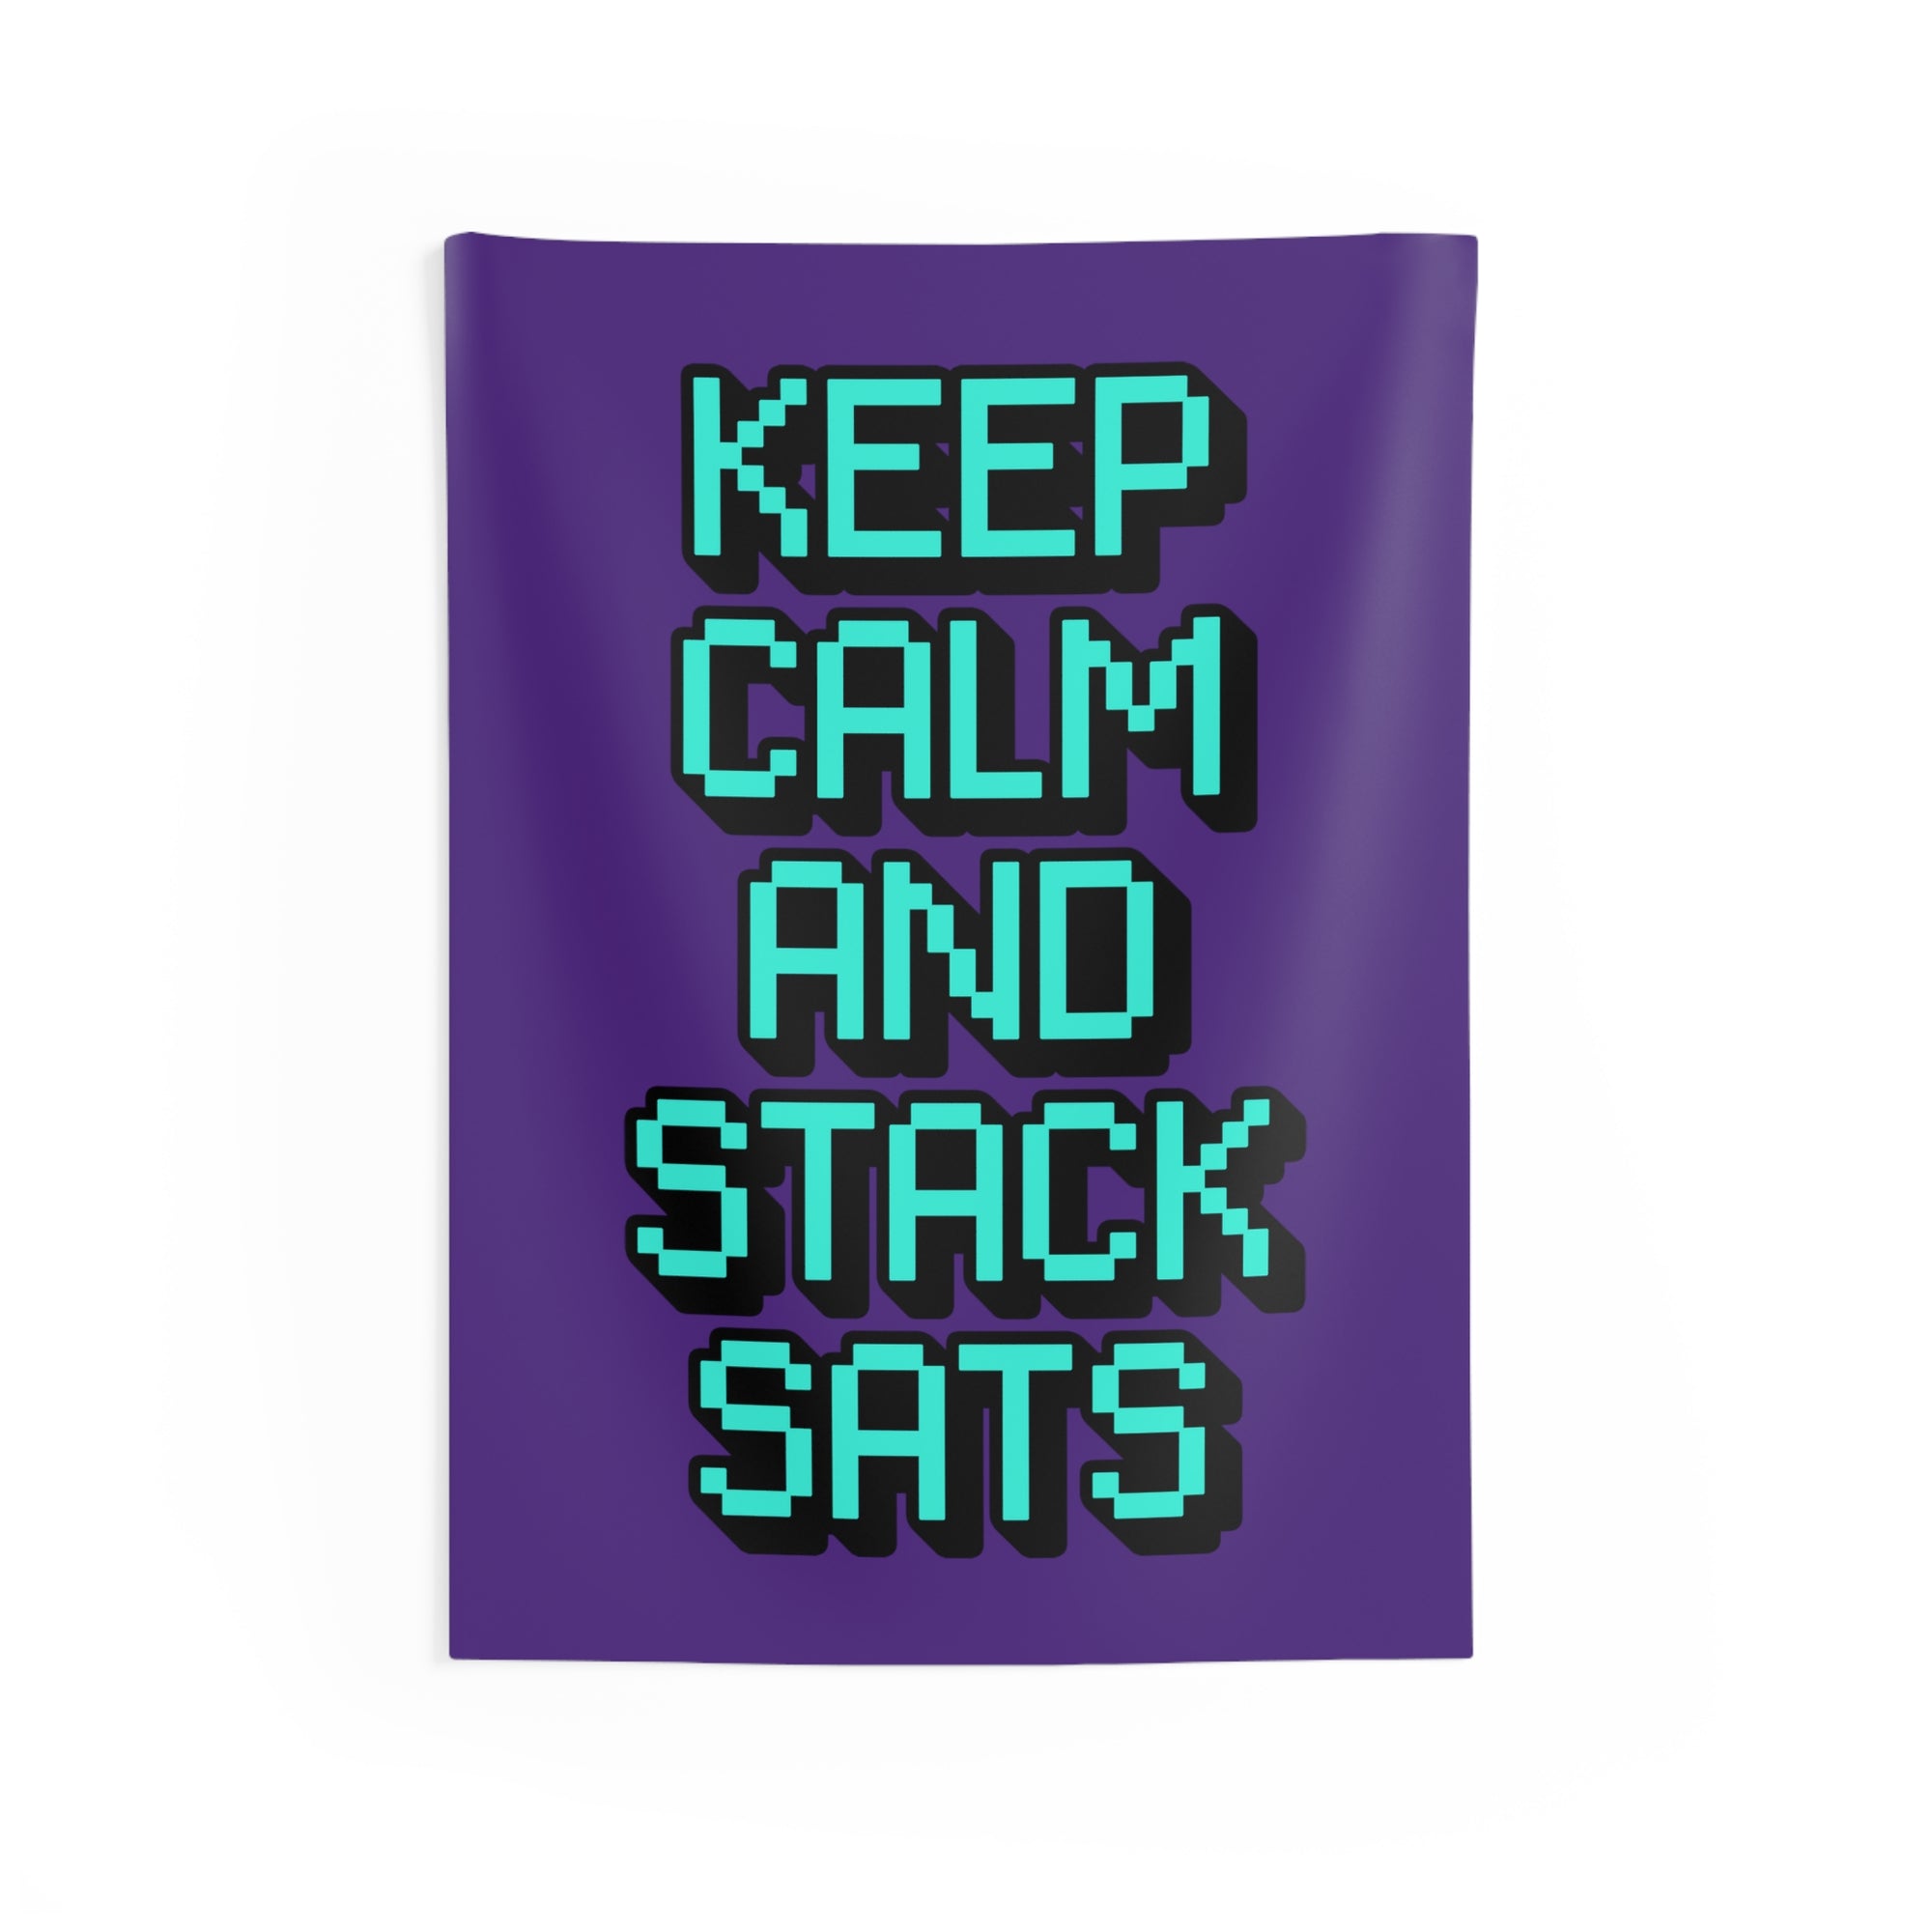 Bitcoin Merchandise - Keep Calm And Stack Sats Tapestry (Pixel Style).